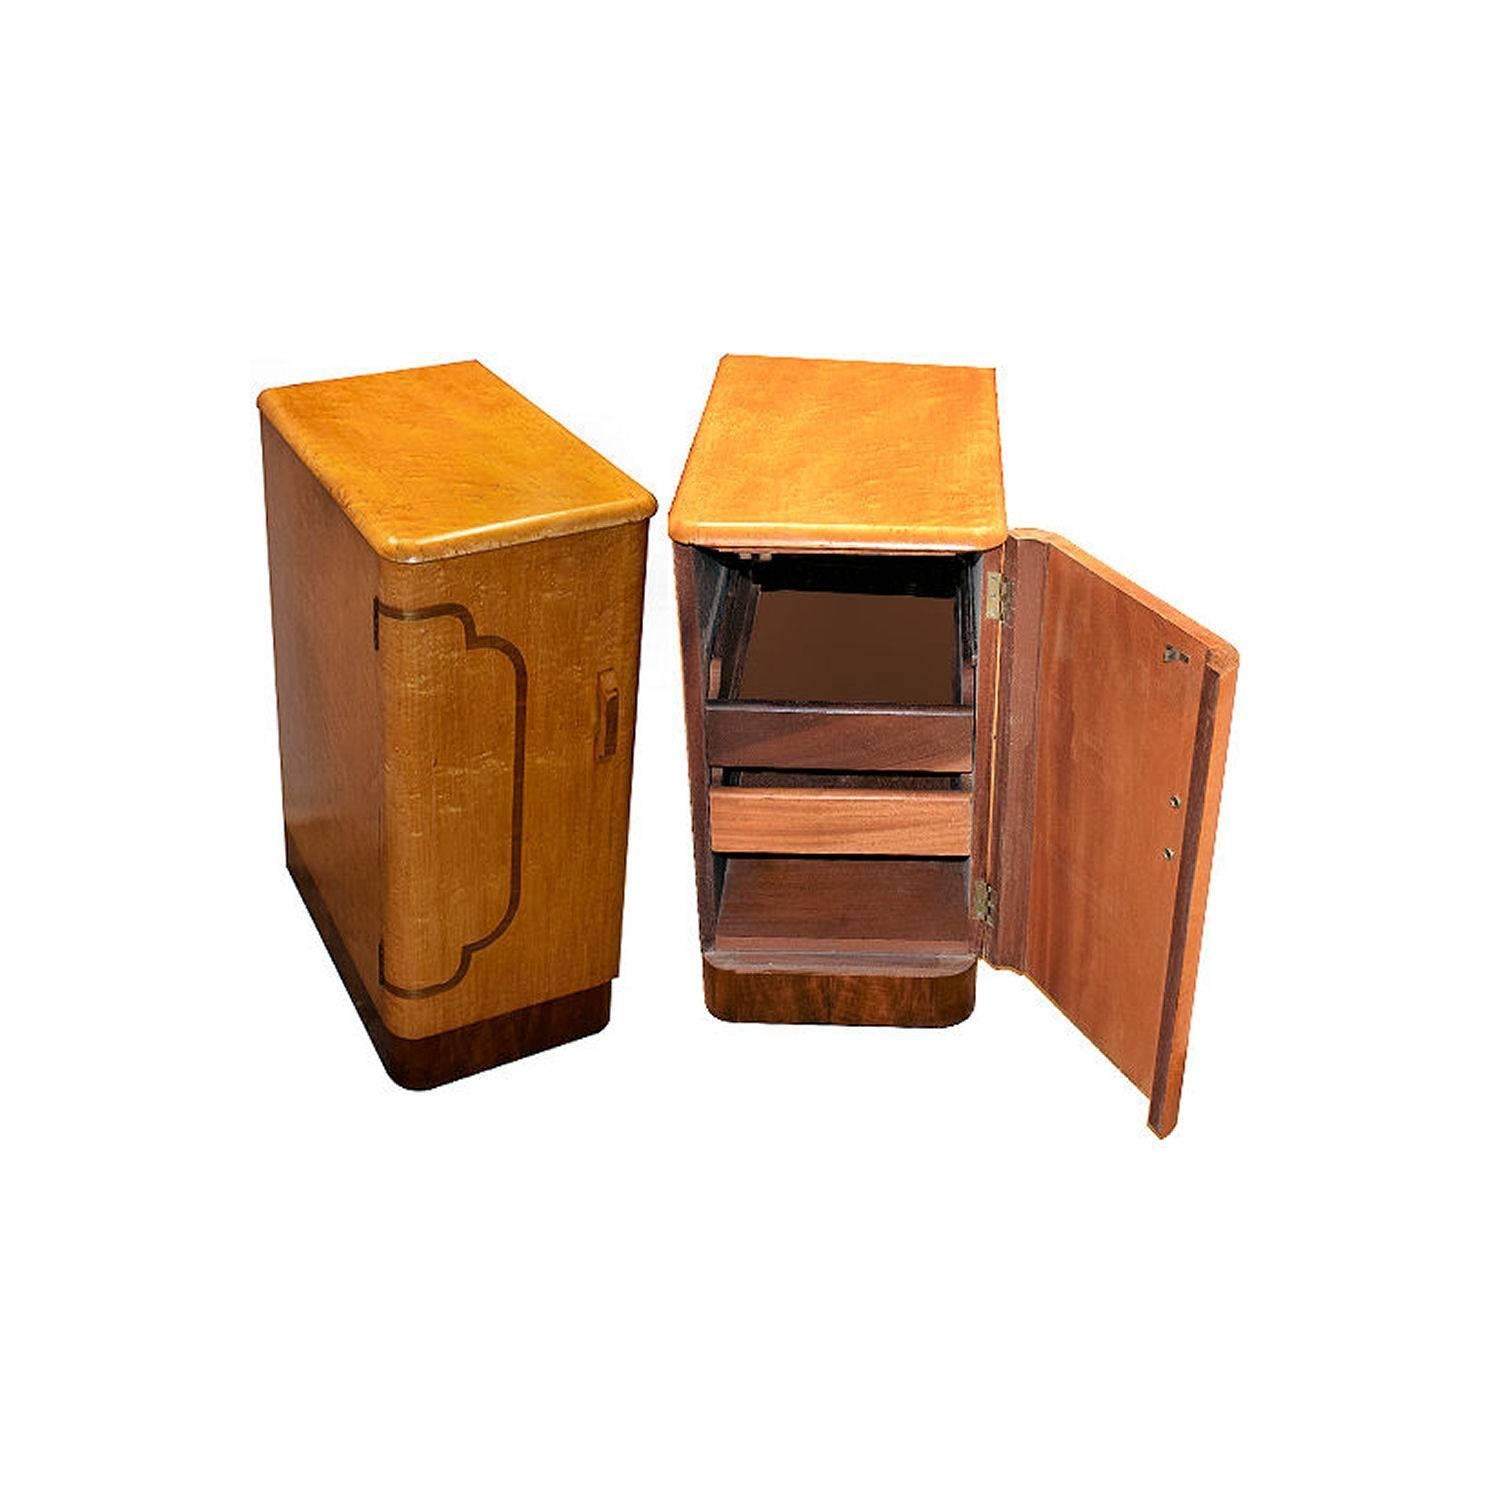 1930s bedside cabinets